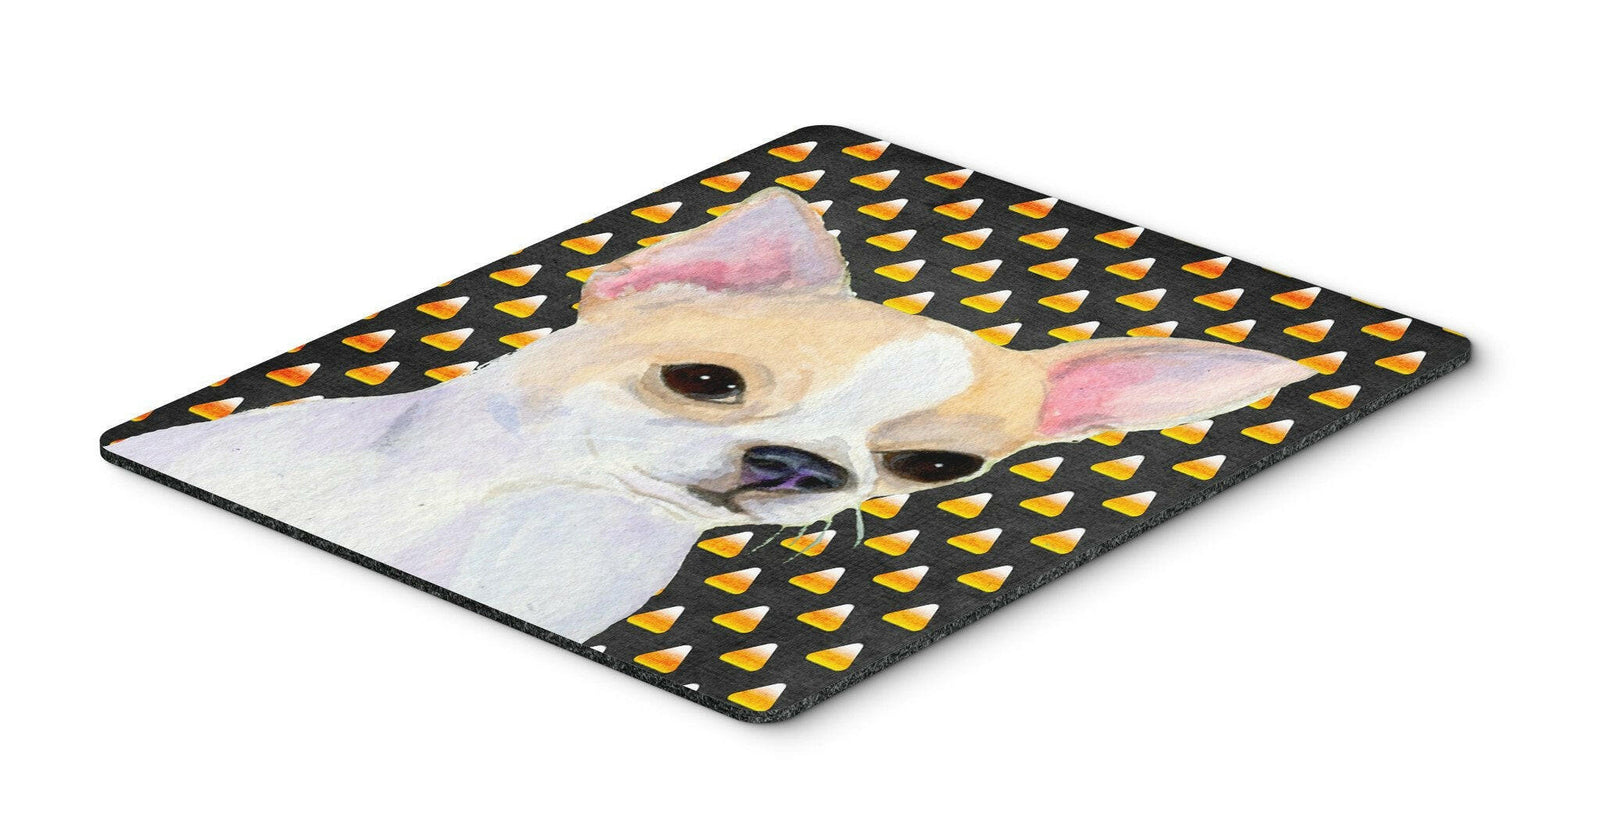 Chihuahua Candy Corn Halloween Portrait Mouse Pad, Hot Pad or Trivet by Caroline's Treasures